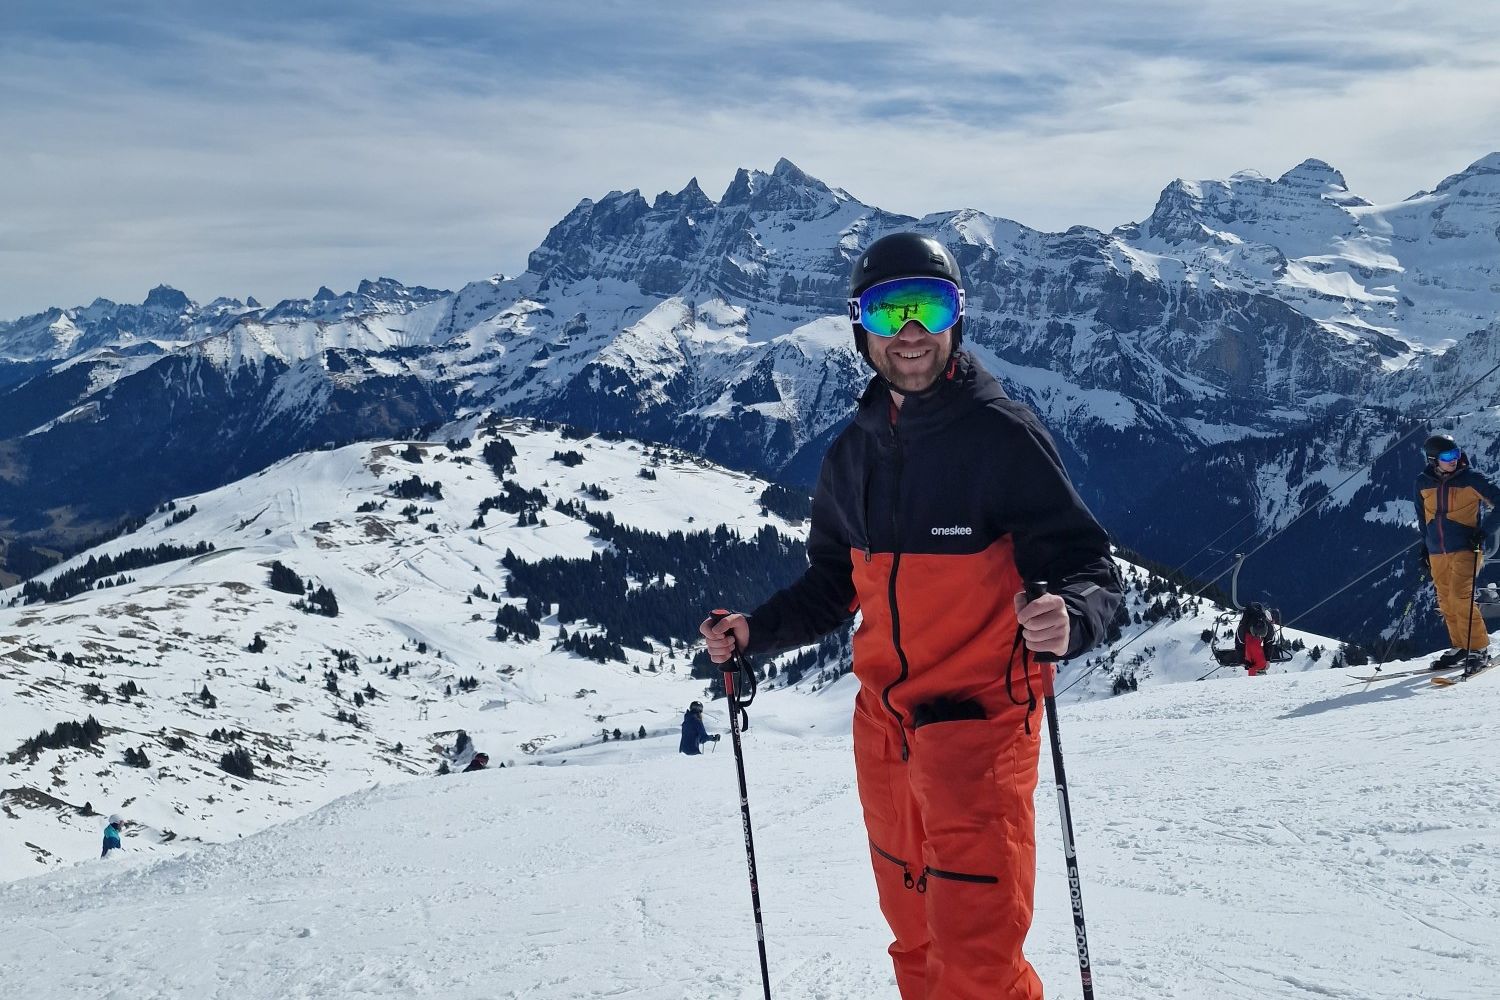 Skiing man stood on slope with snowy mountains in background_Rock The Pistes Festival 